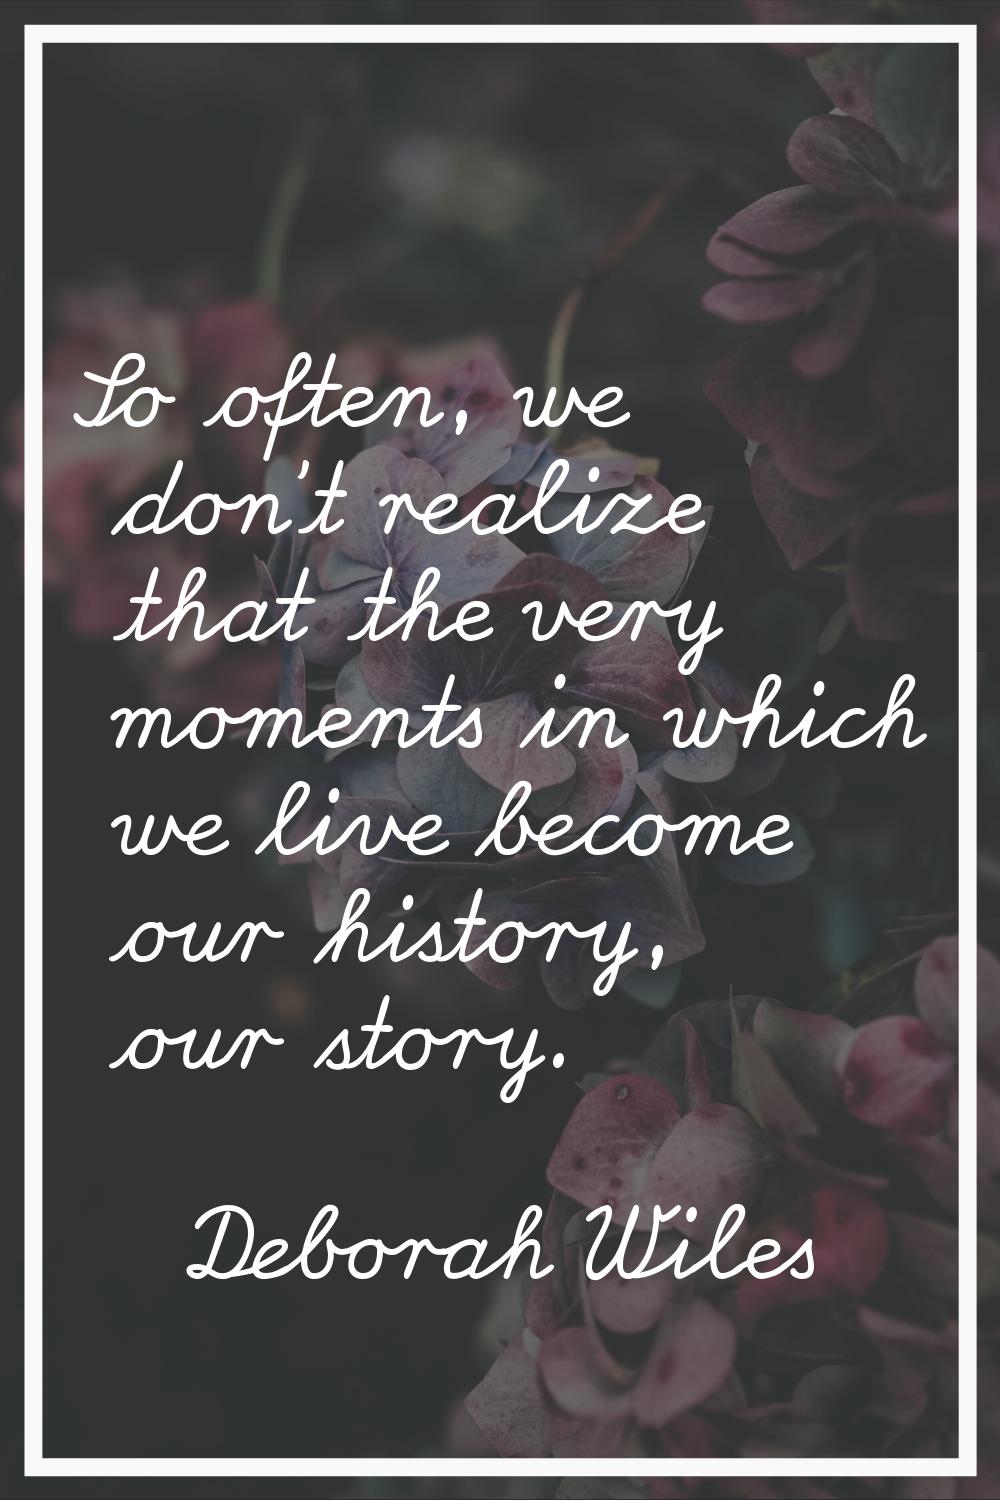 So often, we don't realize that the very moments in which we live become our history, our story.